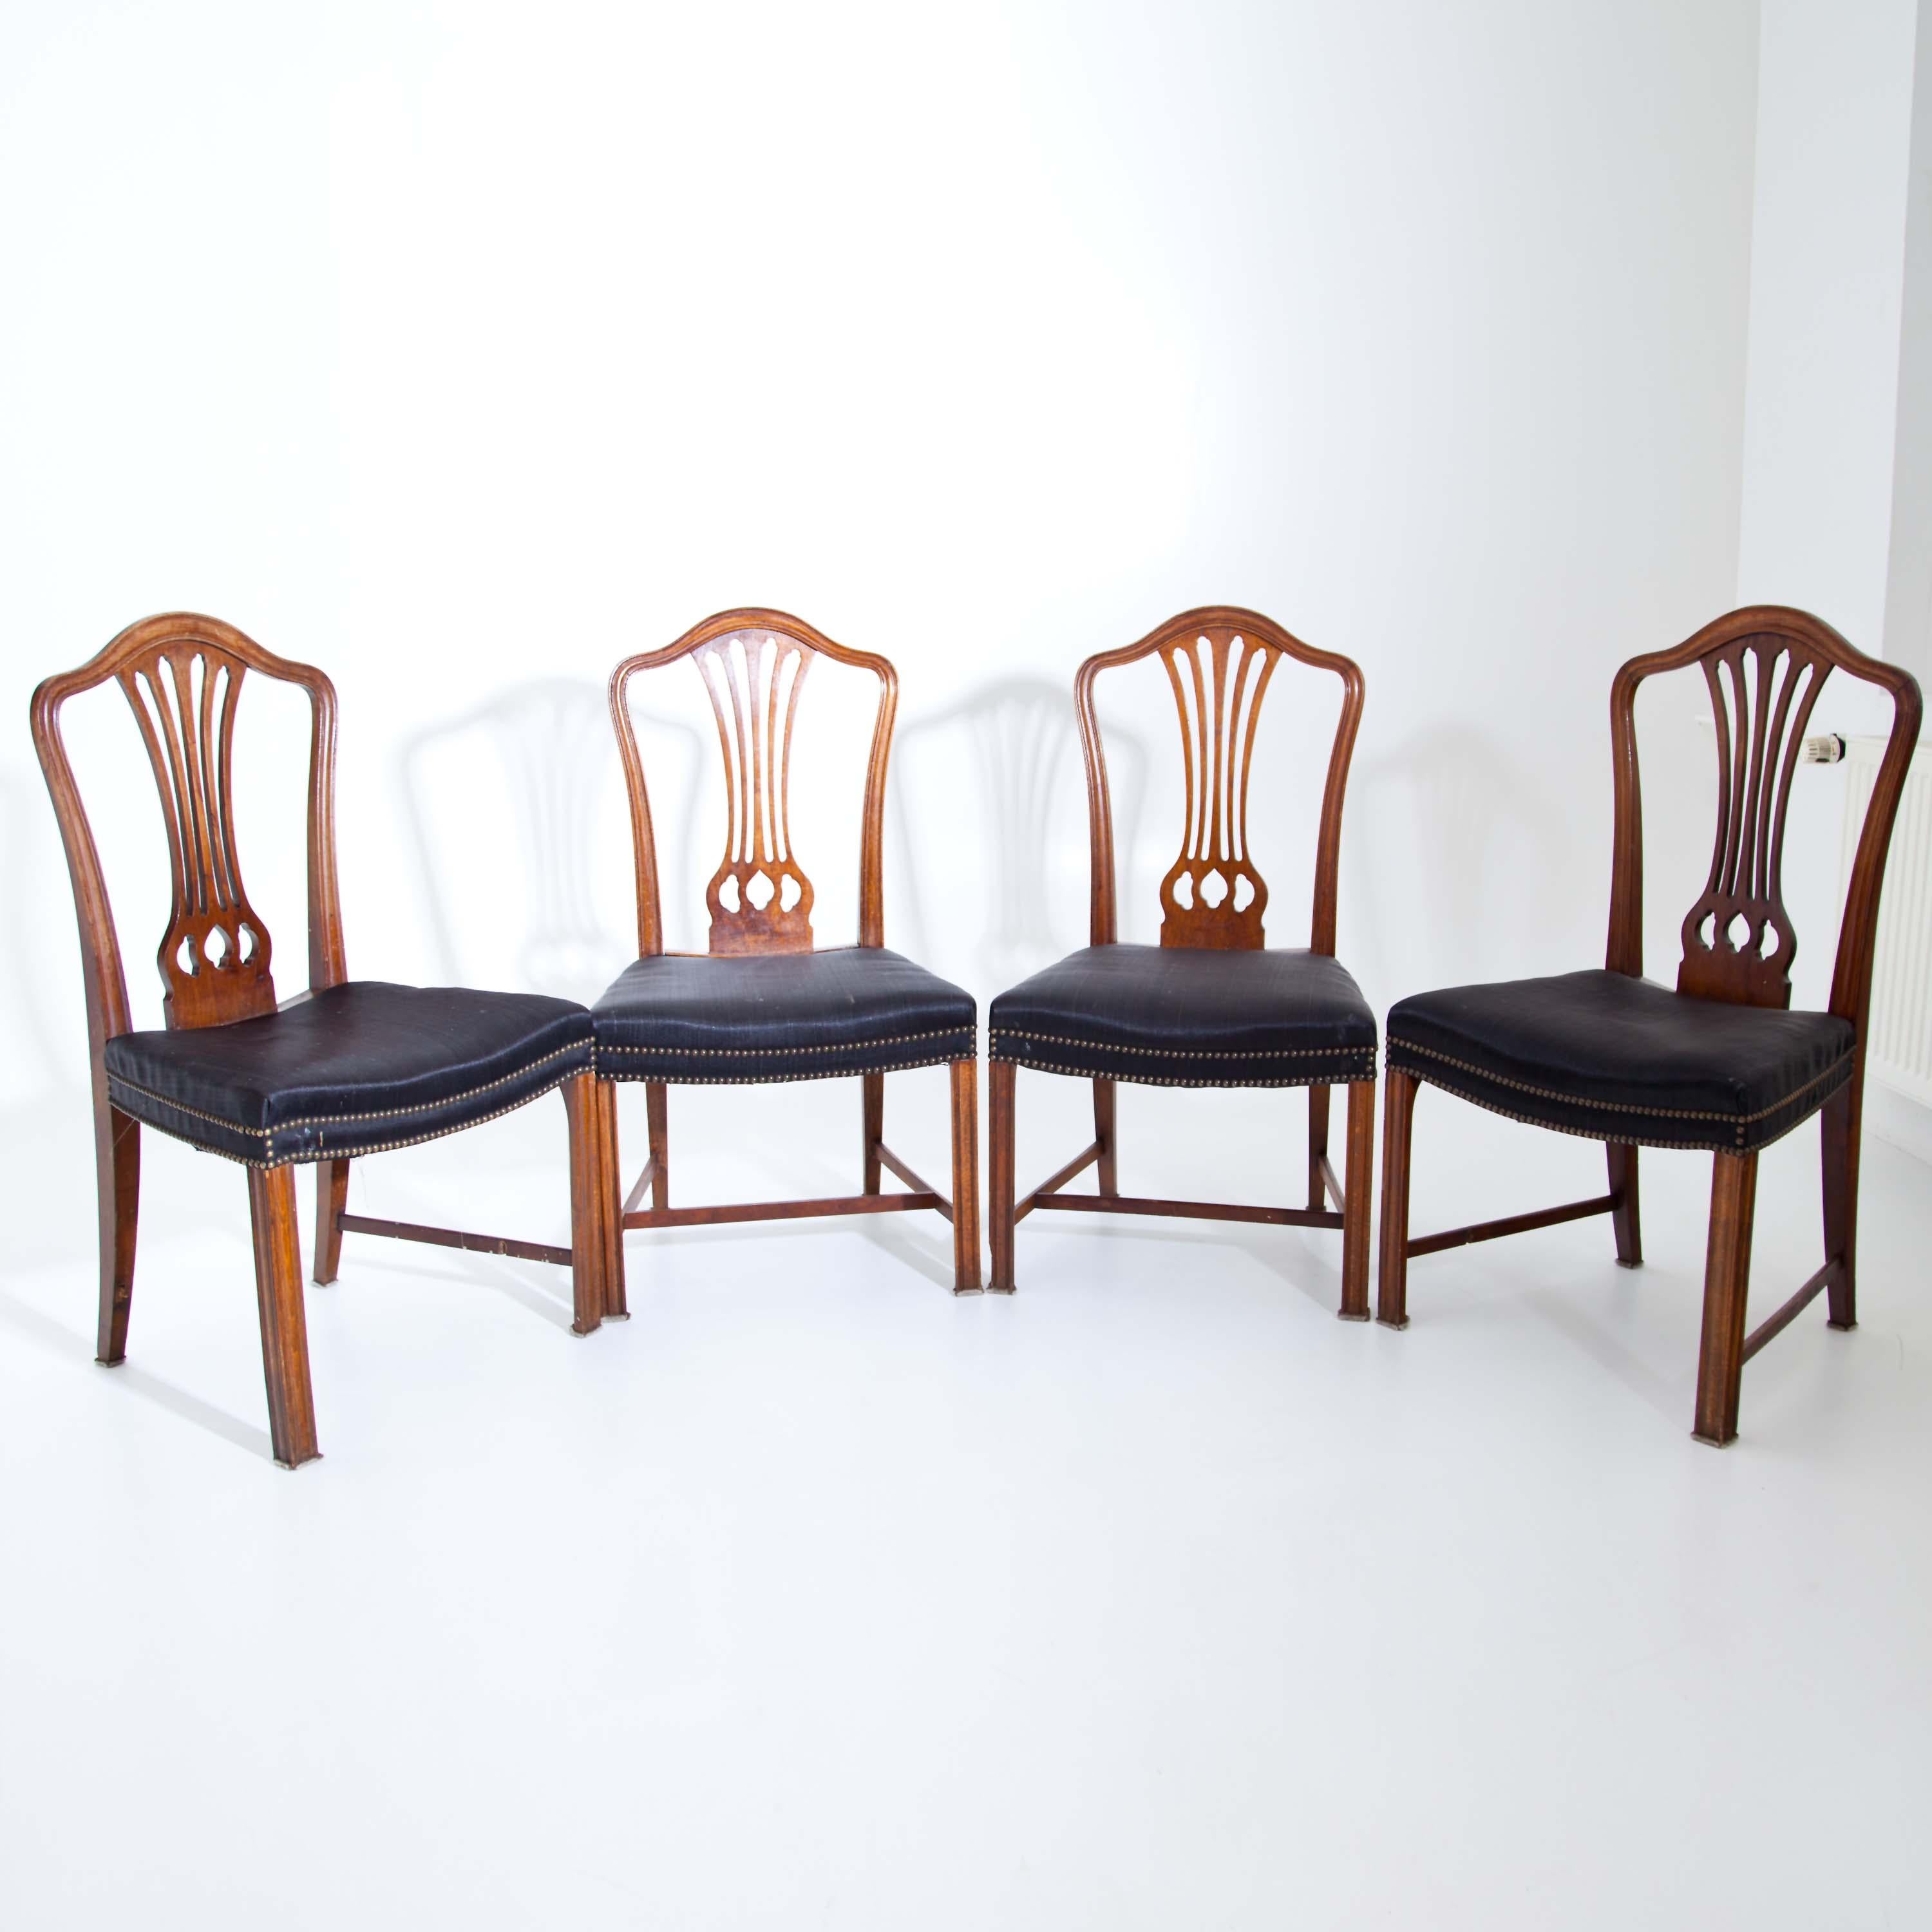 Early 19th Century Mahogany Dining Room Chairs after Chippendale, England, circa 1800